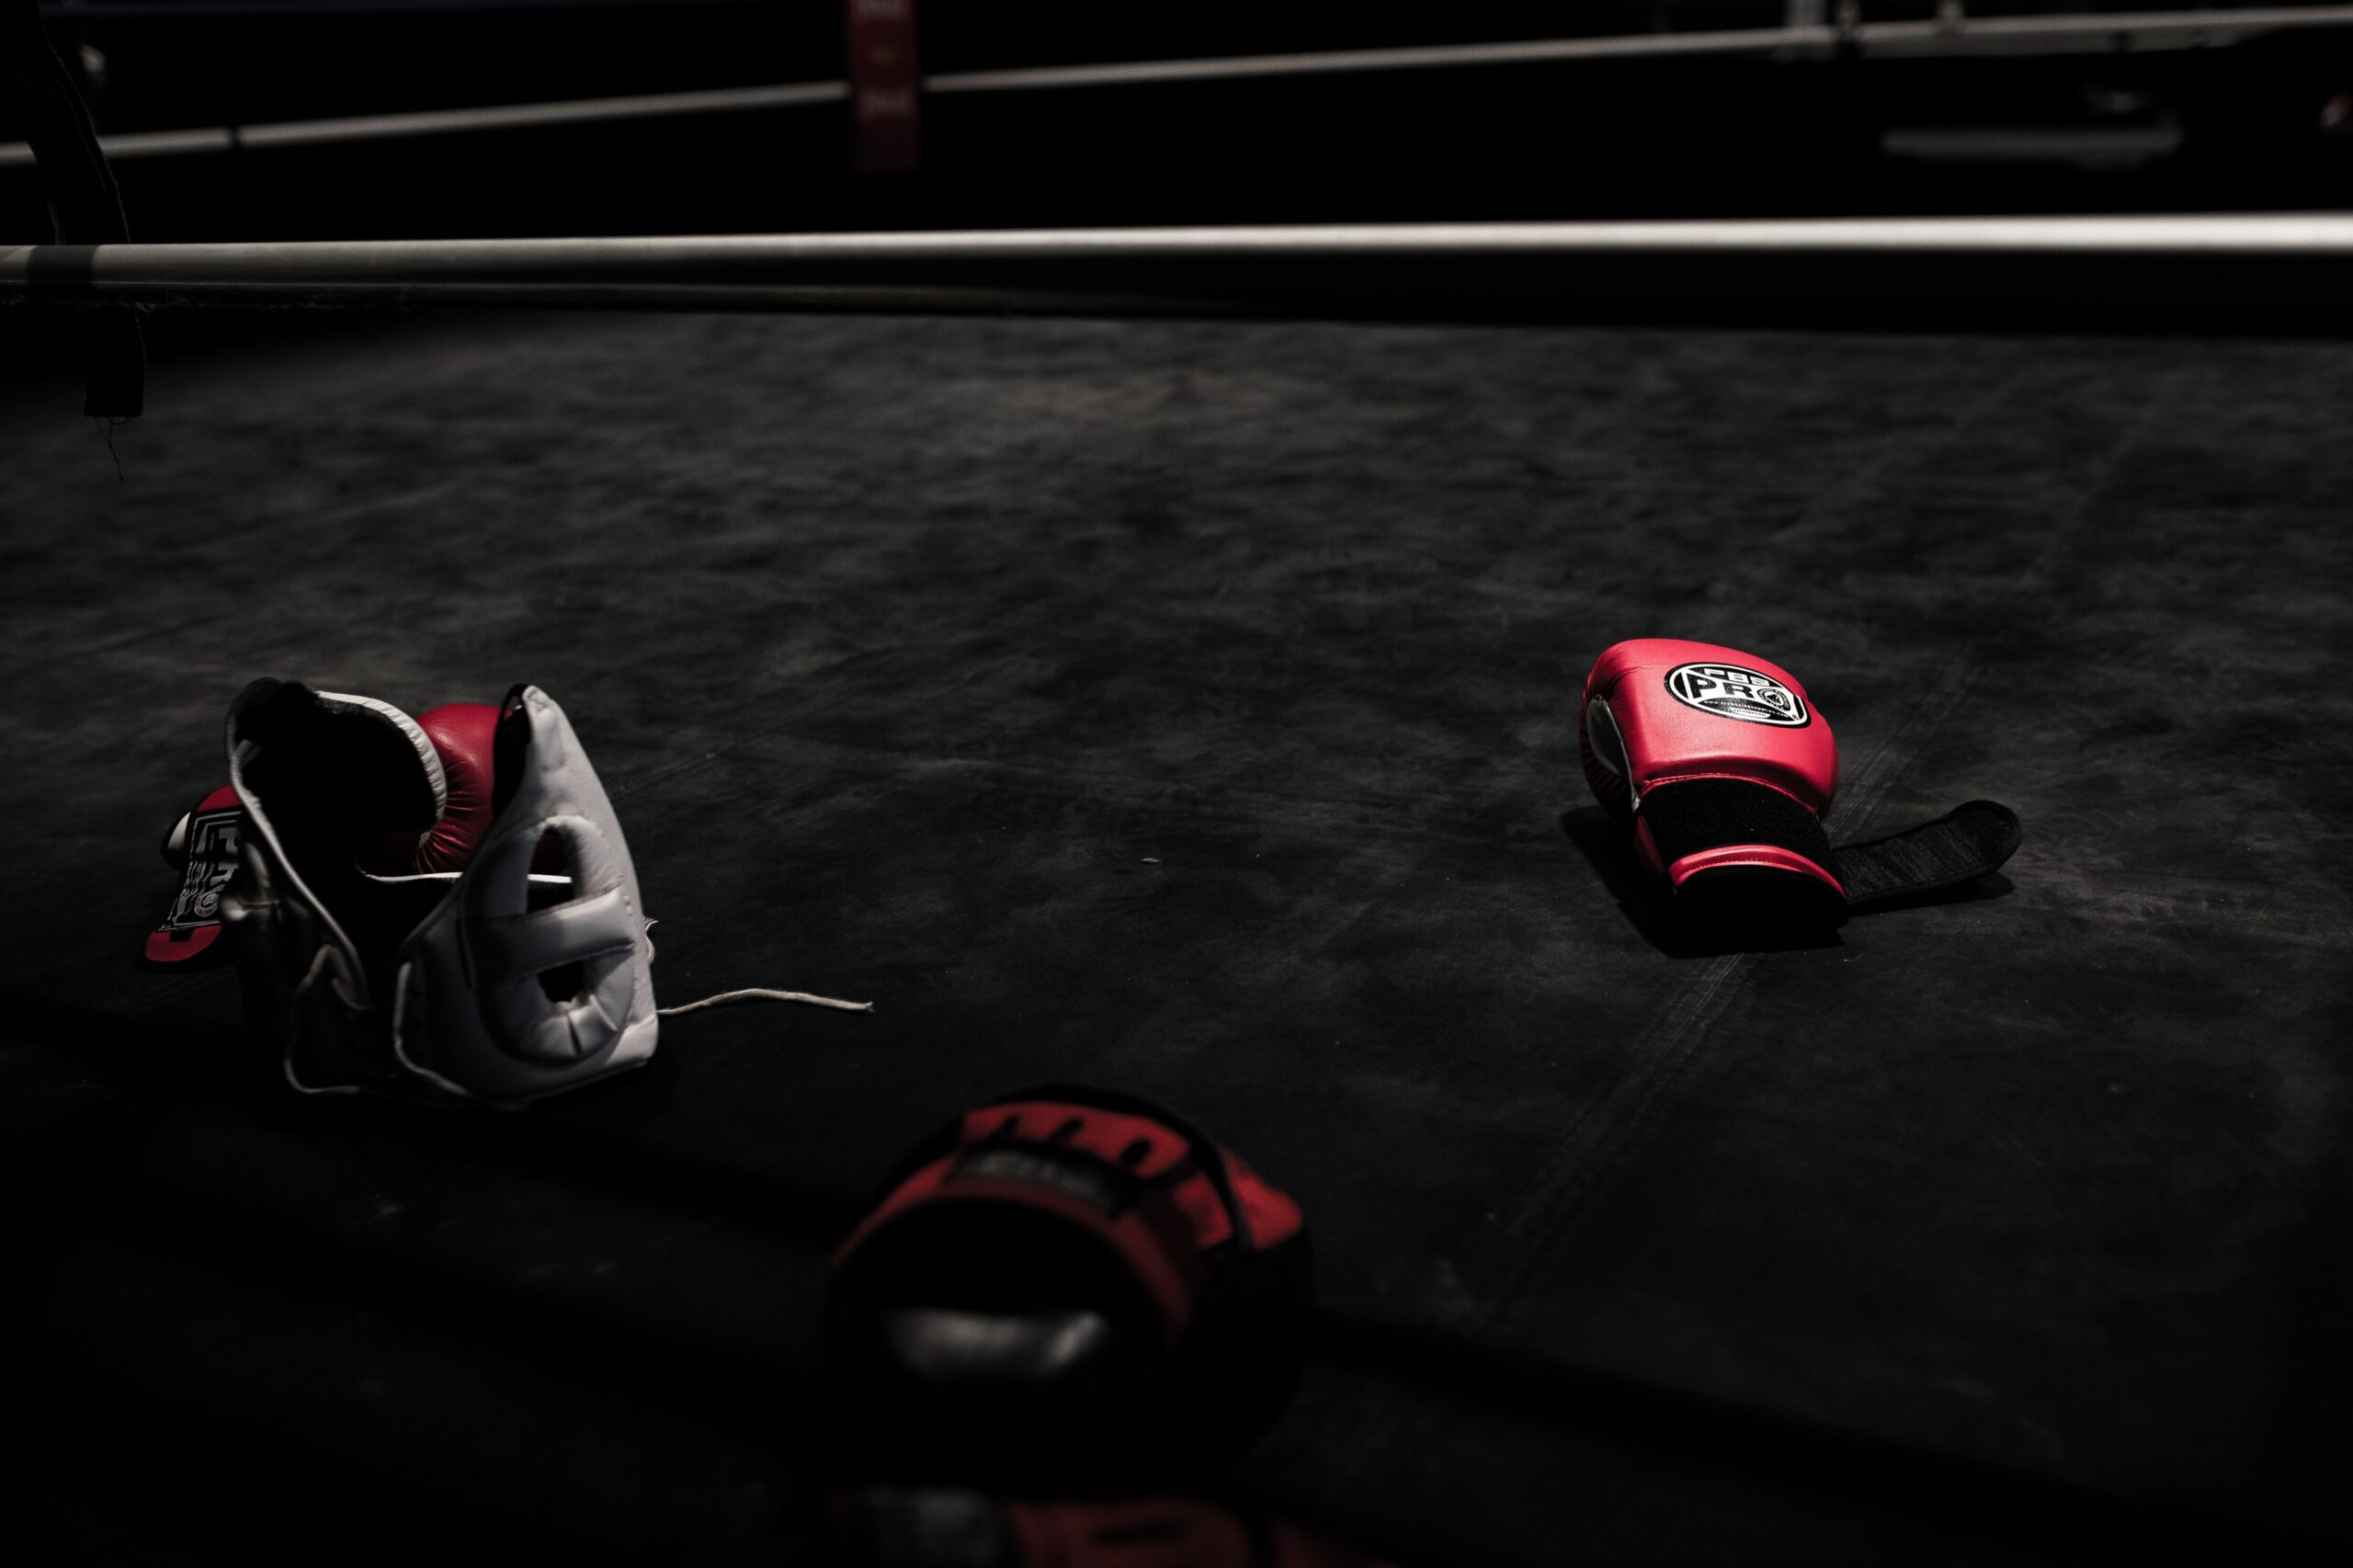 Boxing Equipment in the Ring